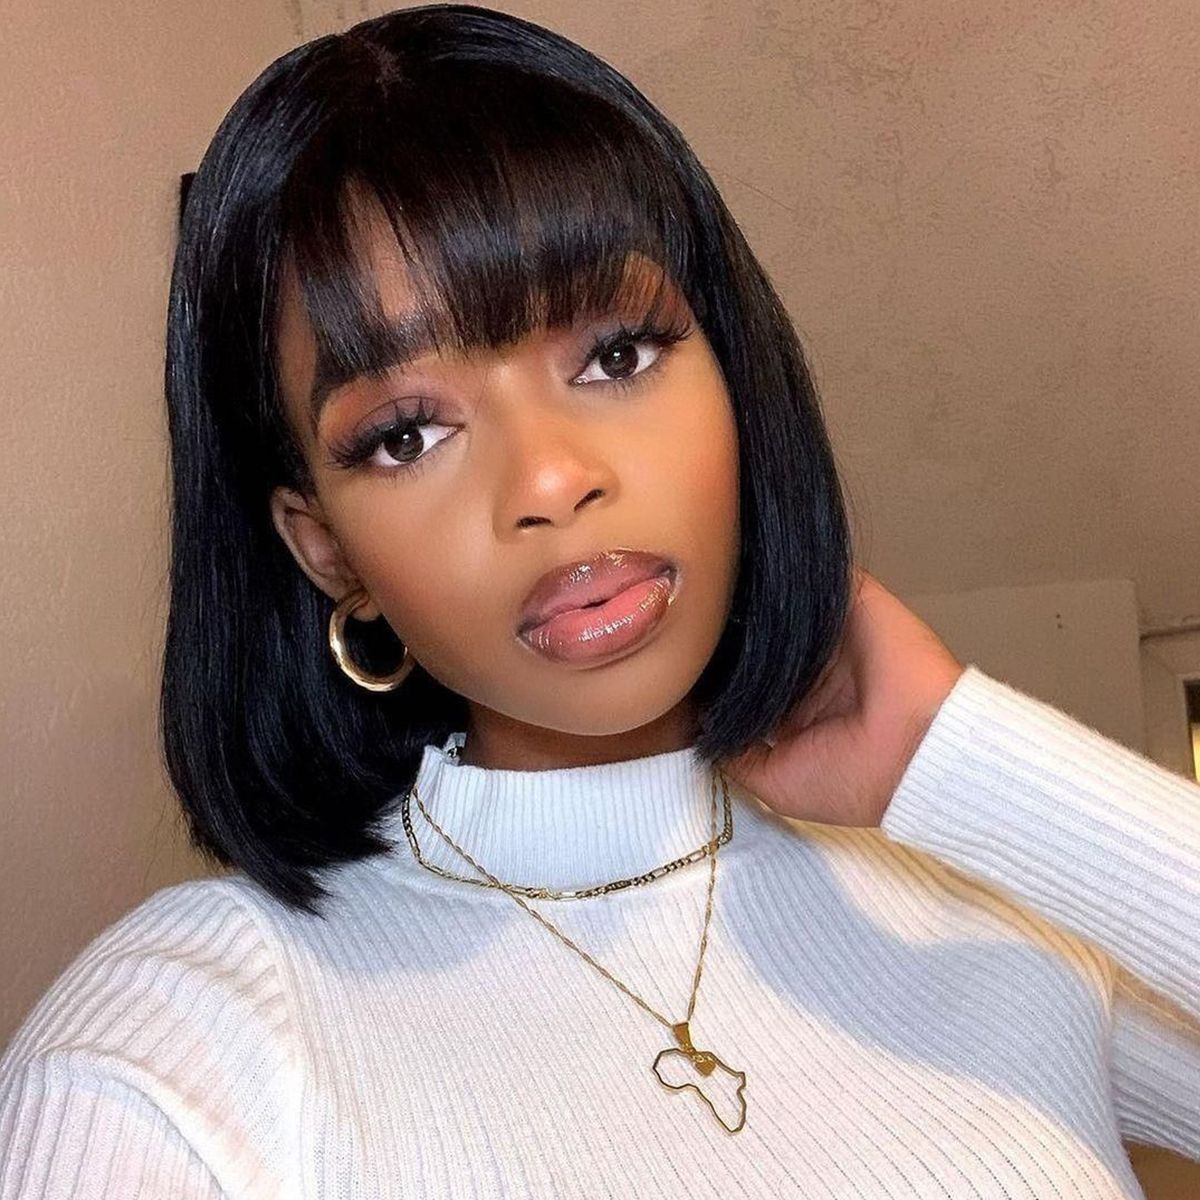 Chestnut Brown Color Bob Wigs With Bangs Straight Short Non-Lace Human Hair Colored Bob Wigs 180% Density Machine Made [COMB SALE] - arabellahair.com